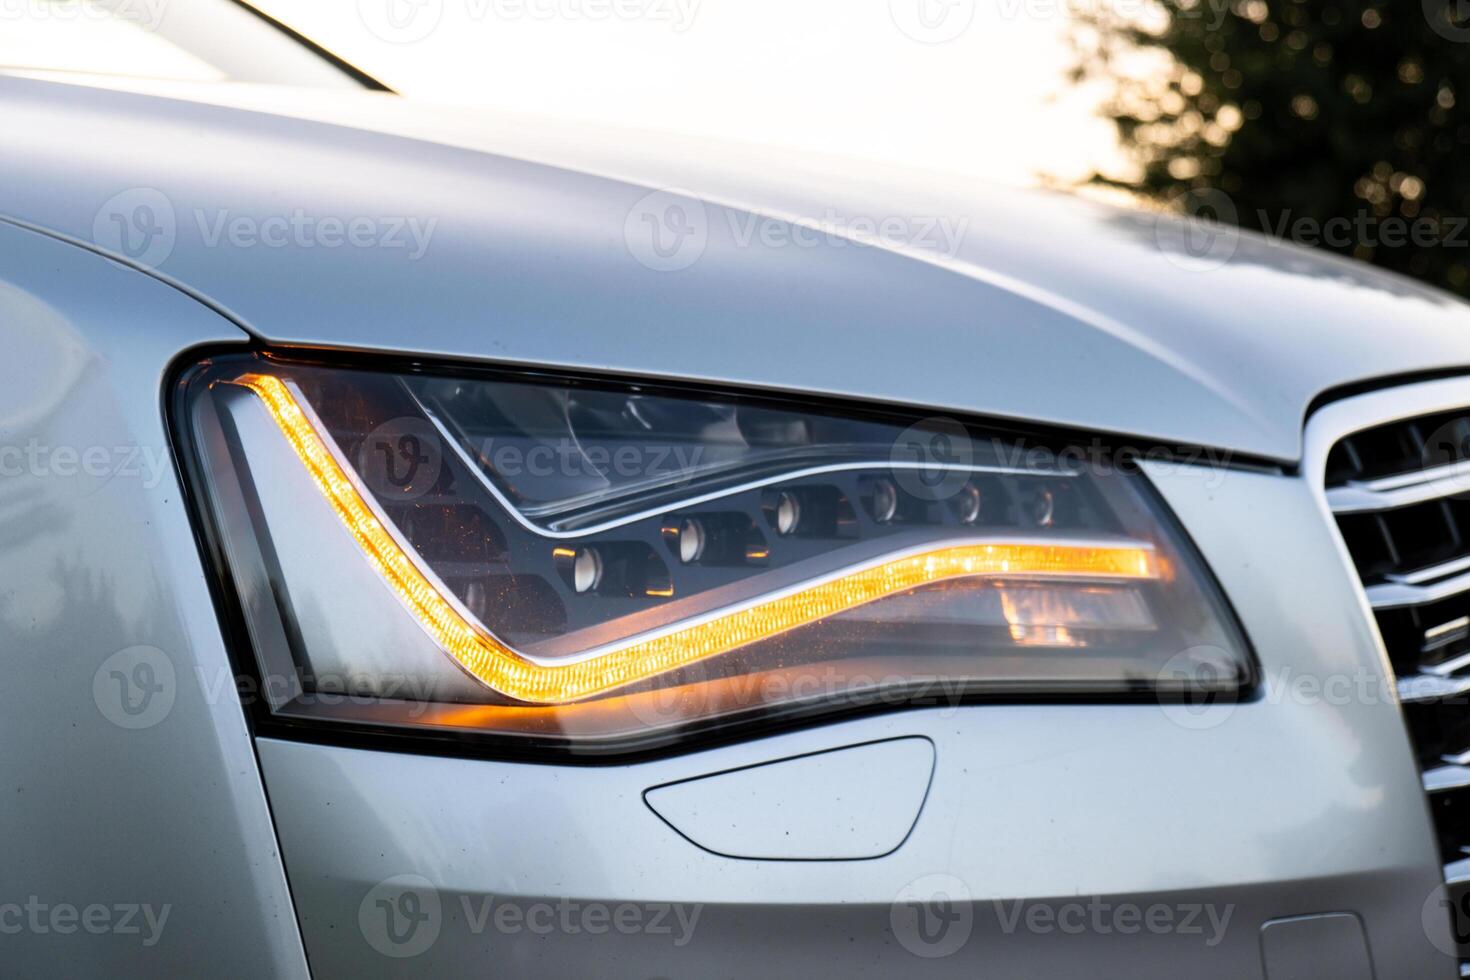 Headlight turned on in Clean car after Washing luxury silver car. Sedan car exterior of modern luxury car during sunset on highway road. Details of front headlamp. Prestige sport automobile photo